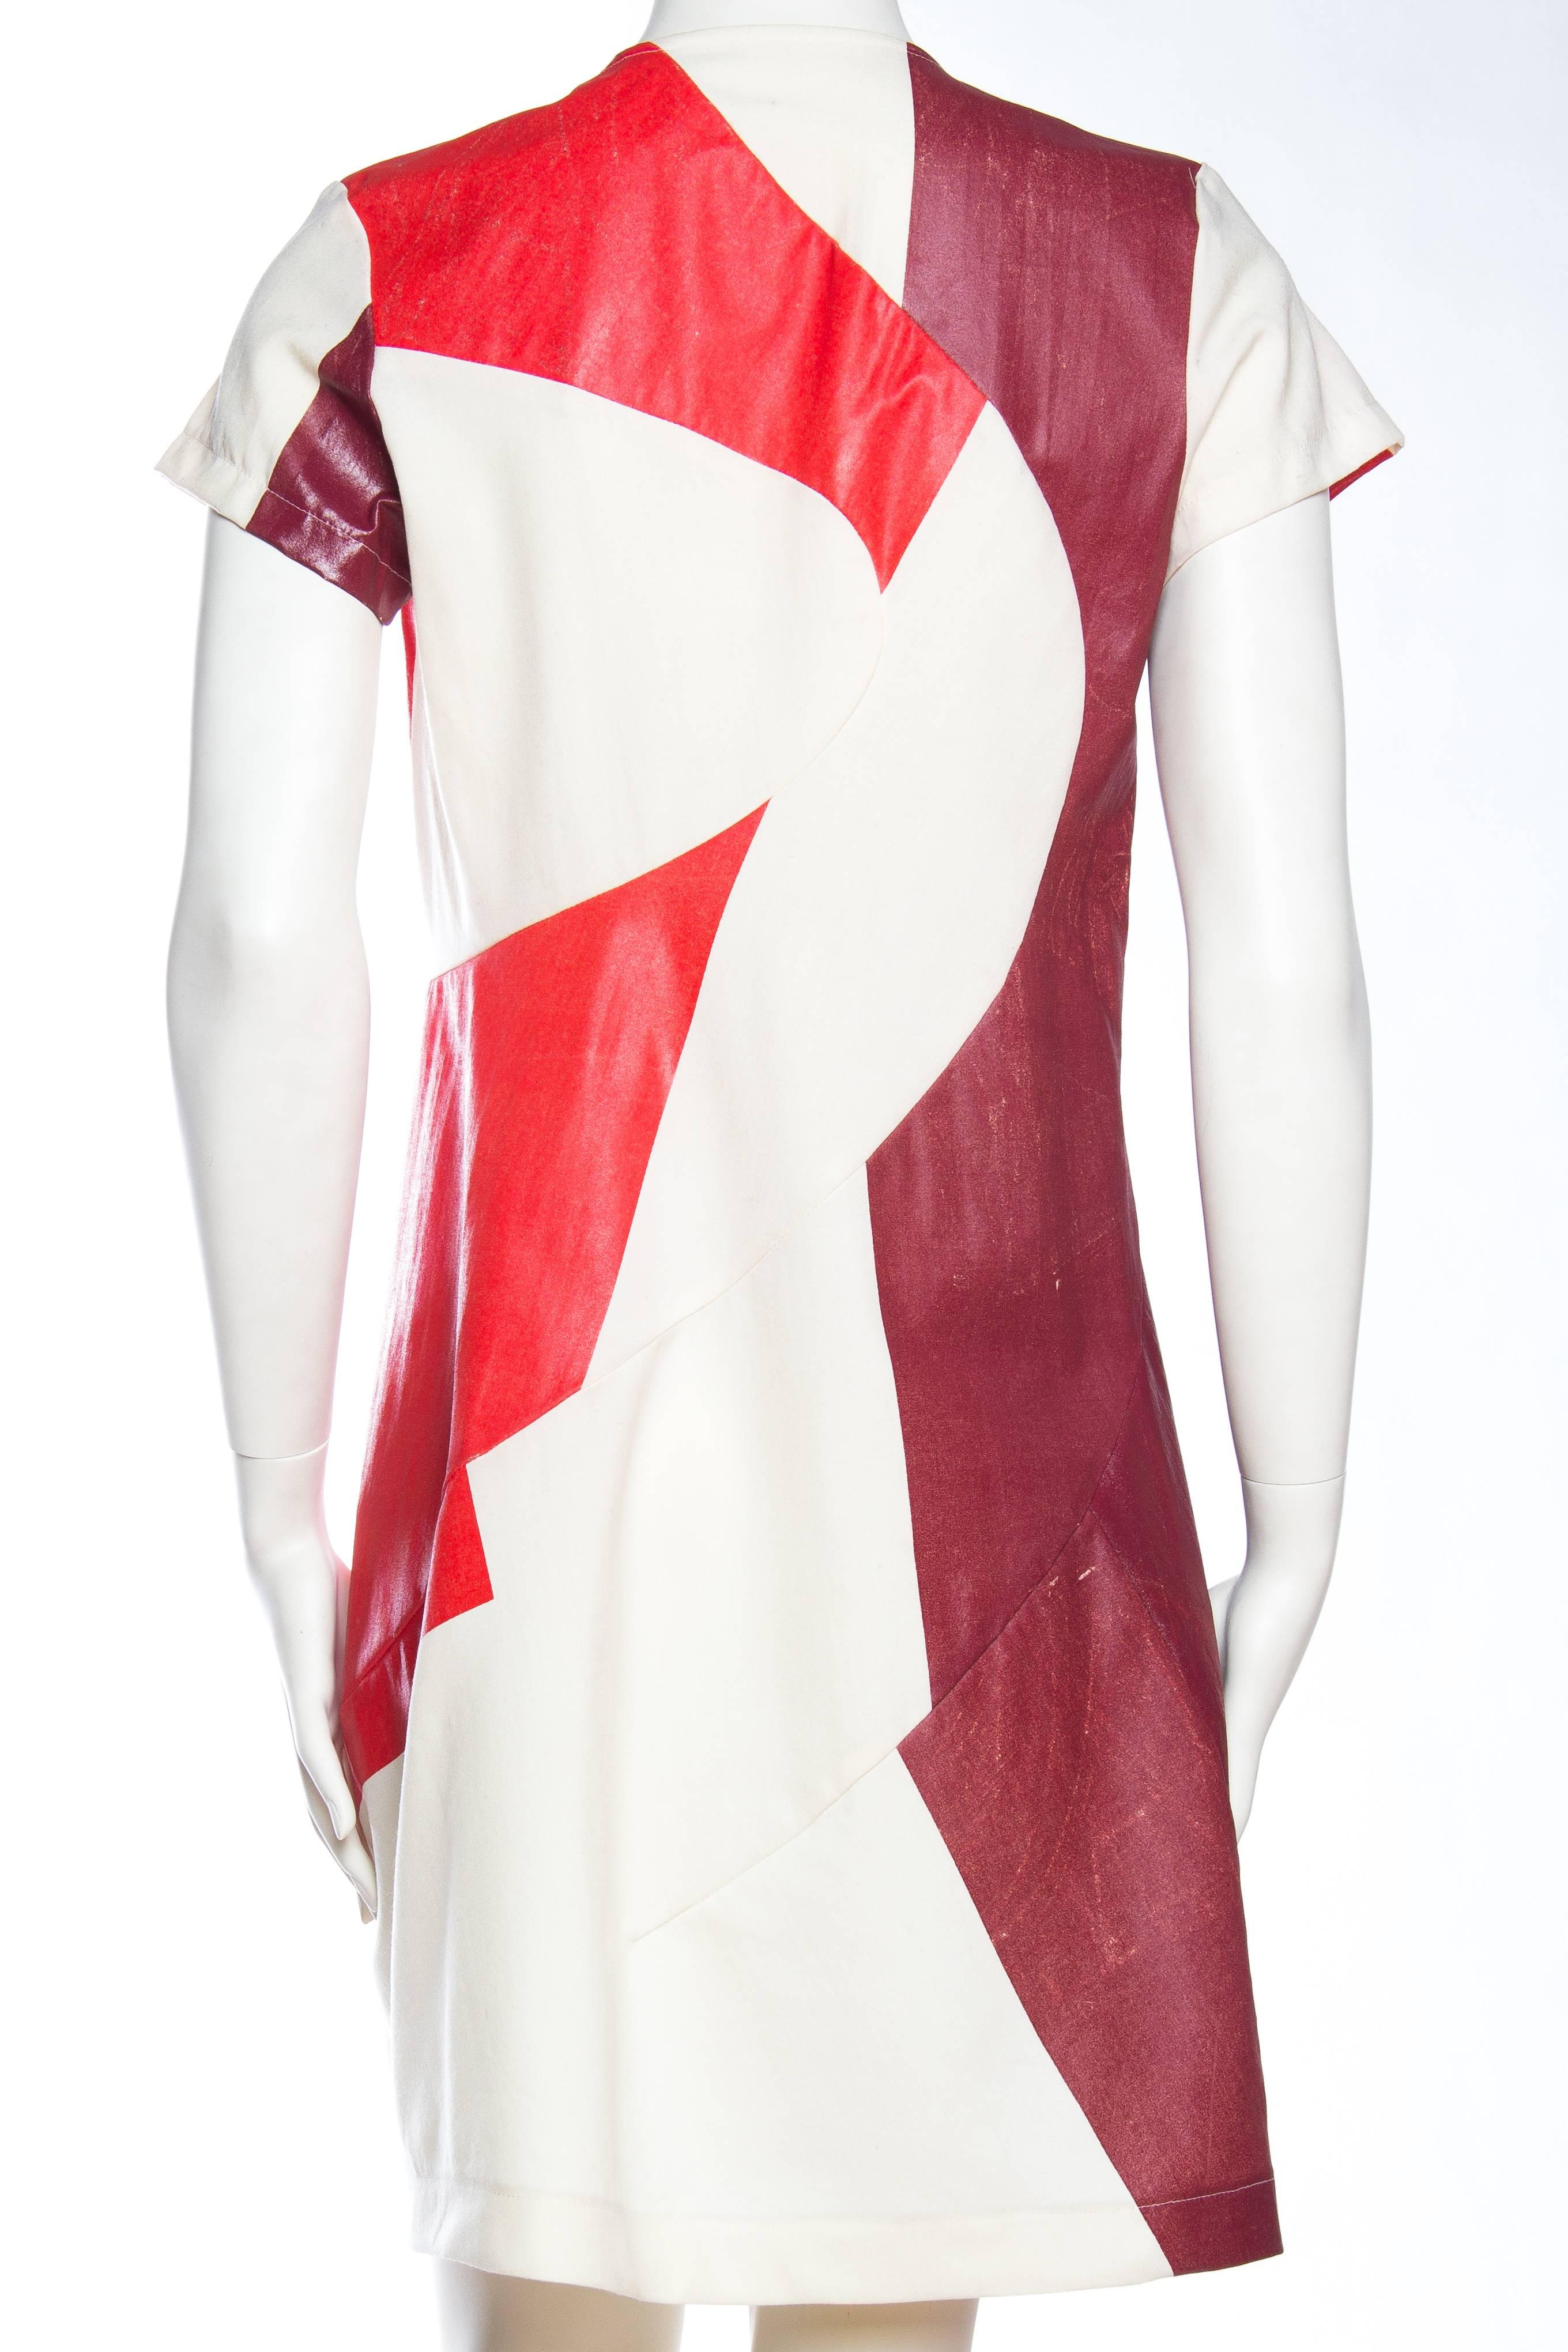 1990S COMME DES GARCONS Red & White Cotton Hand-Painted Patchwork Muslin Dress  For Sale 1